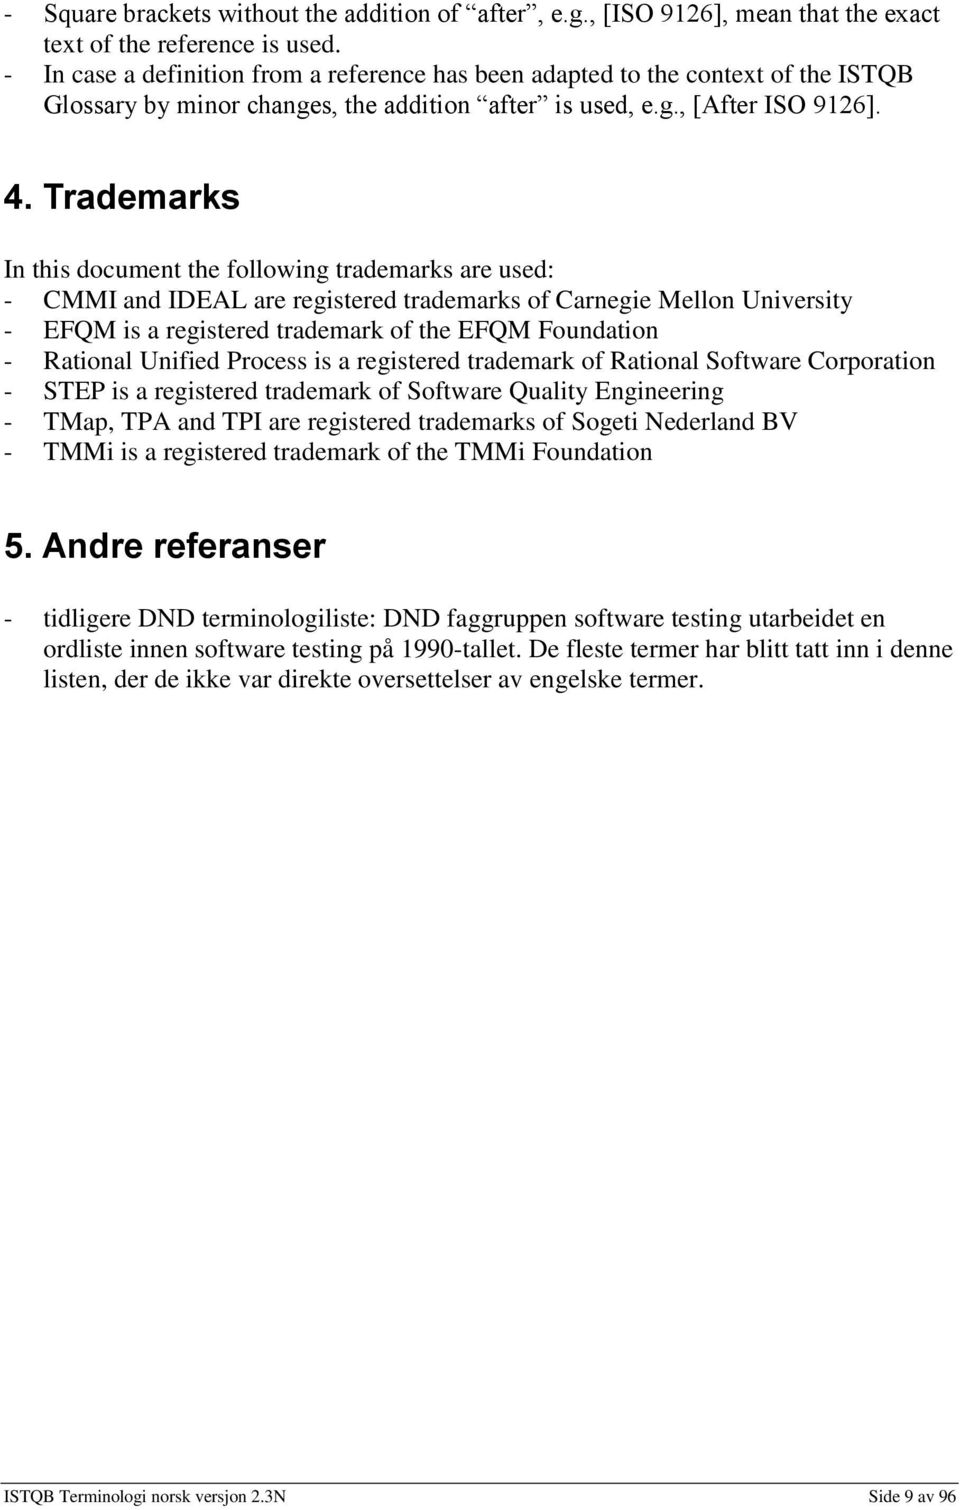 Trademarks In this document the following trademarks are used: - CMMI and IDEAL are registered trademarks of Carnegie Mellon University - EQM is a registered trademark of the EQM oundation - Rational